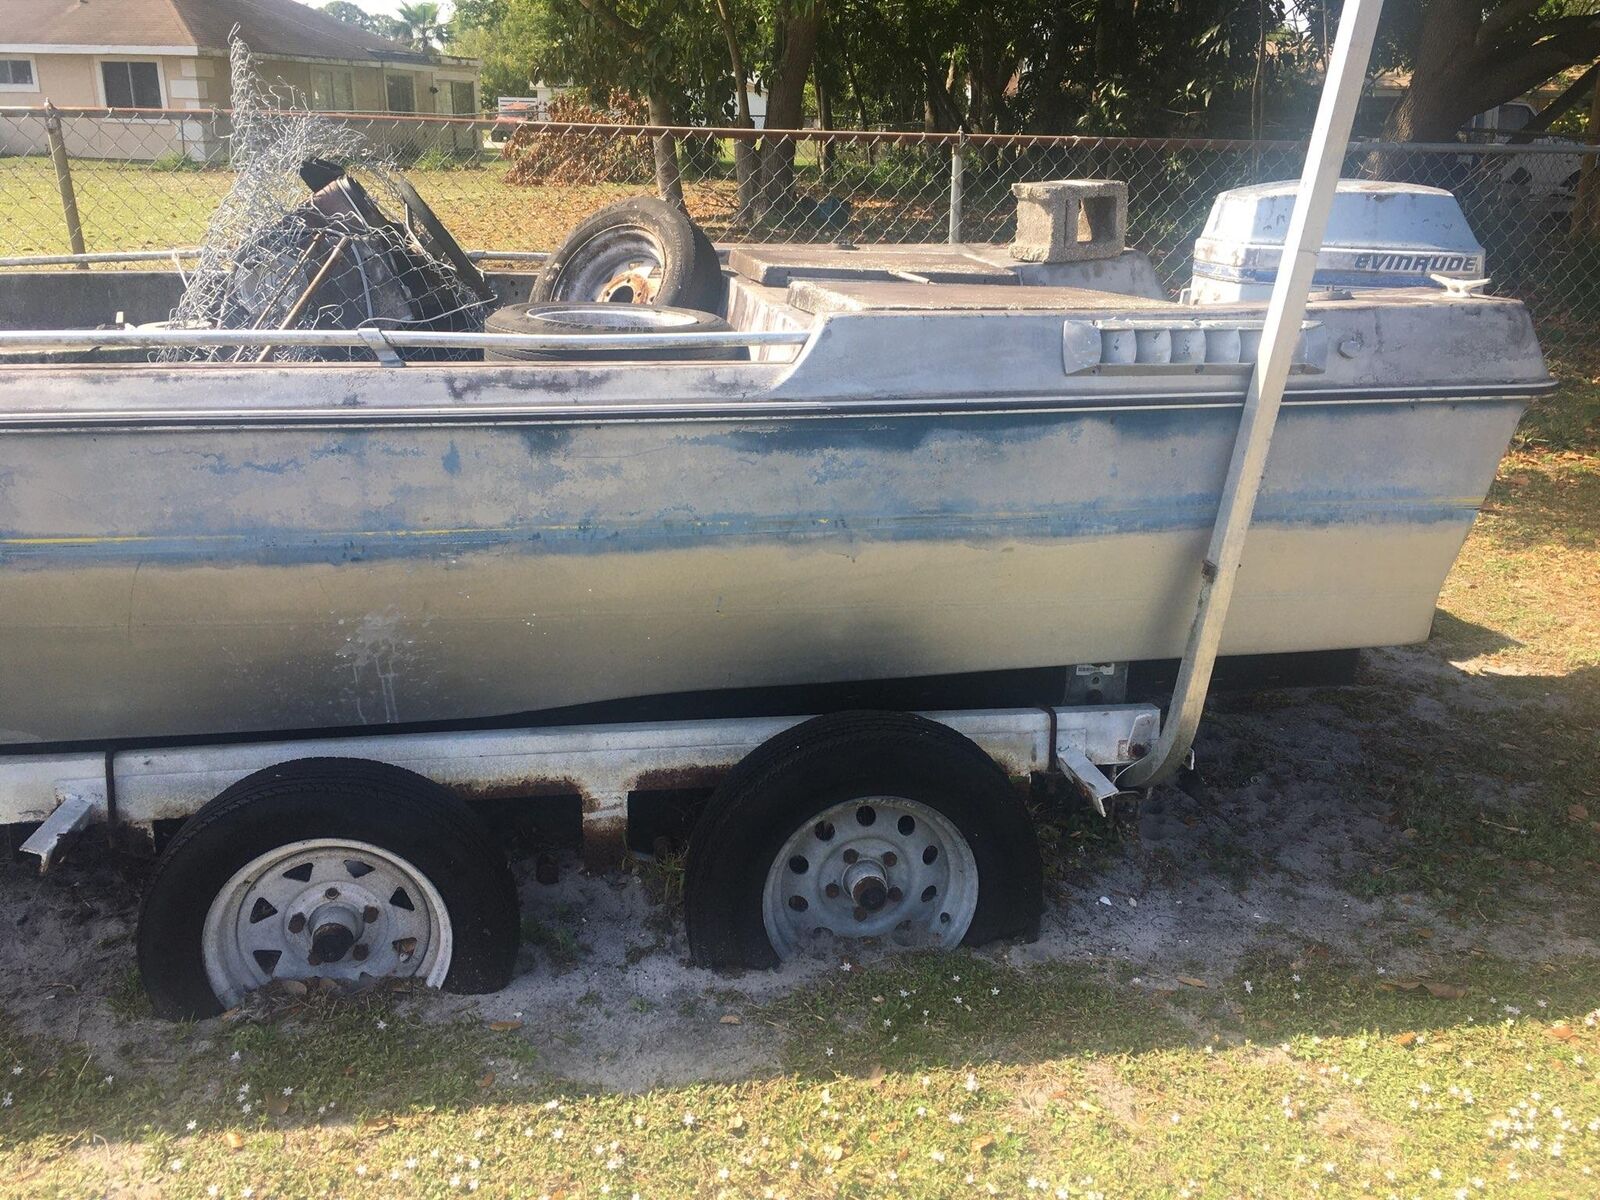 Owner 1977 Venture 18' Boat Located in Port St. Lucie, FL - Has Trailer